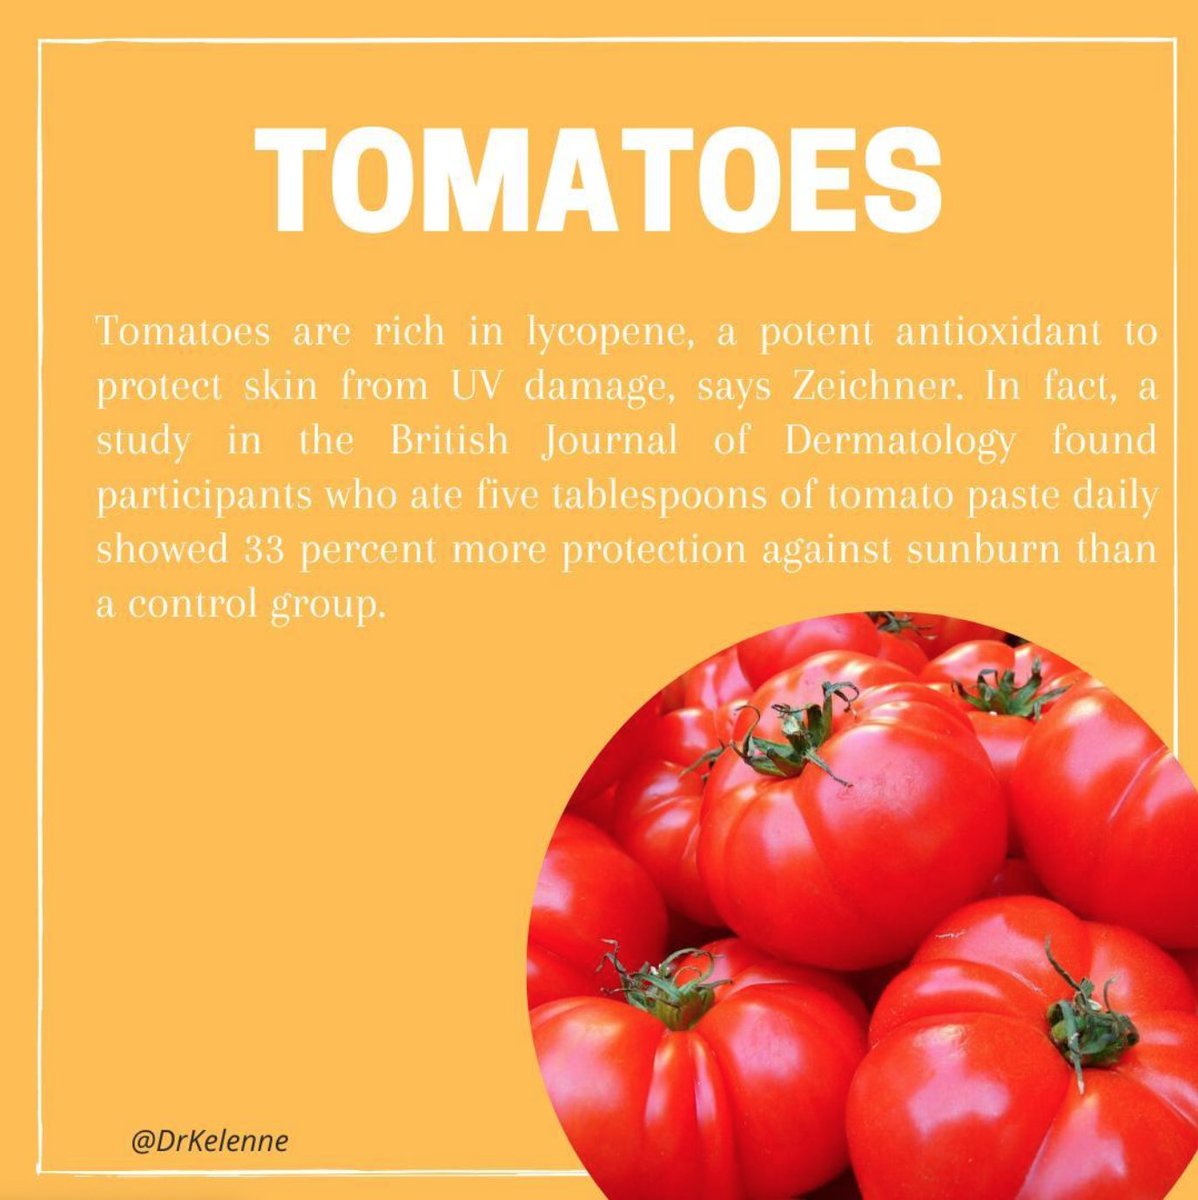 Tomatoes are rich in lycopene, a potent antioxidant to protect skin from UV damage. #healthcaretips #familymedicine #caribbean #blackdoctor #telemedicine #telehealth #yourcaribbeandoctor #eatyourtomatoes 🇹🇹🇻🇨🇵🇷🇦🇬🇧🇸🇧🇧🇧🇷🇨🇦🇫🇰🇬🇩🇬🇾🇯🇲🇭🇹🇱🇨🇰🇳